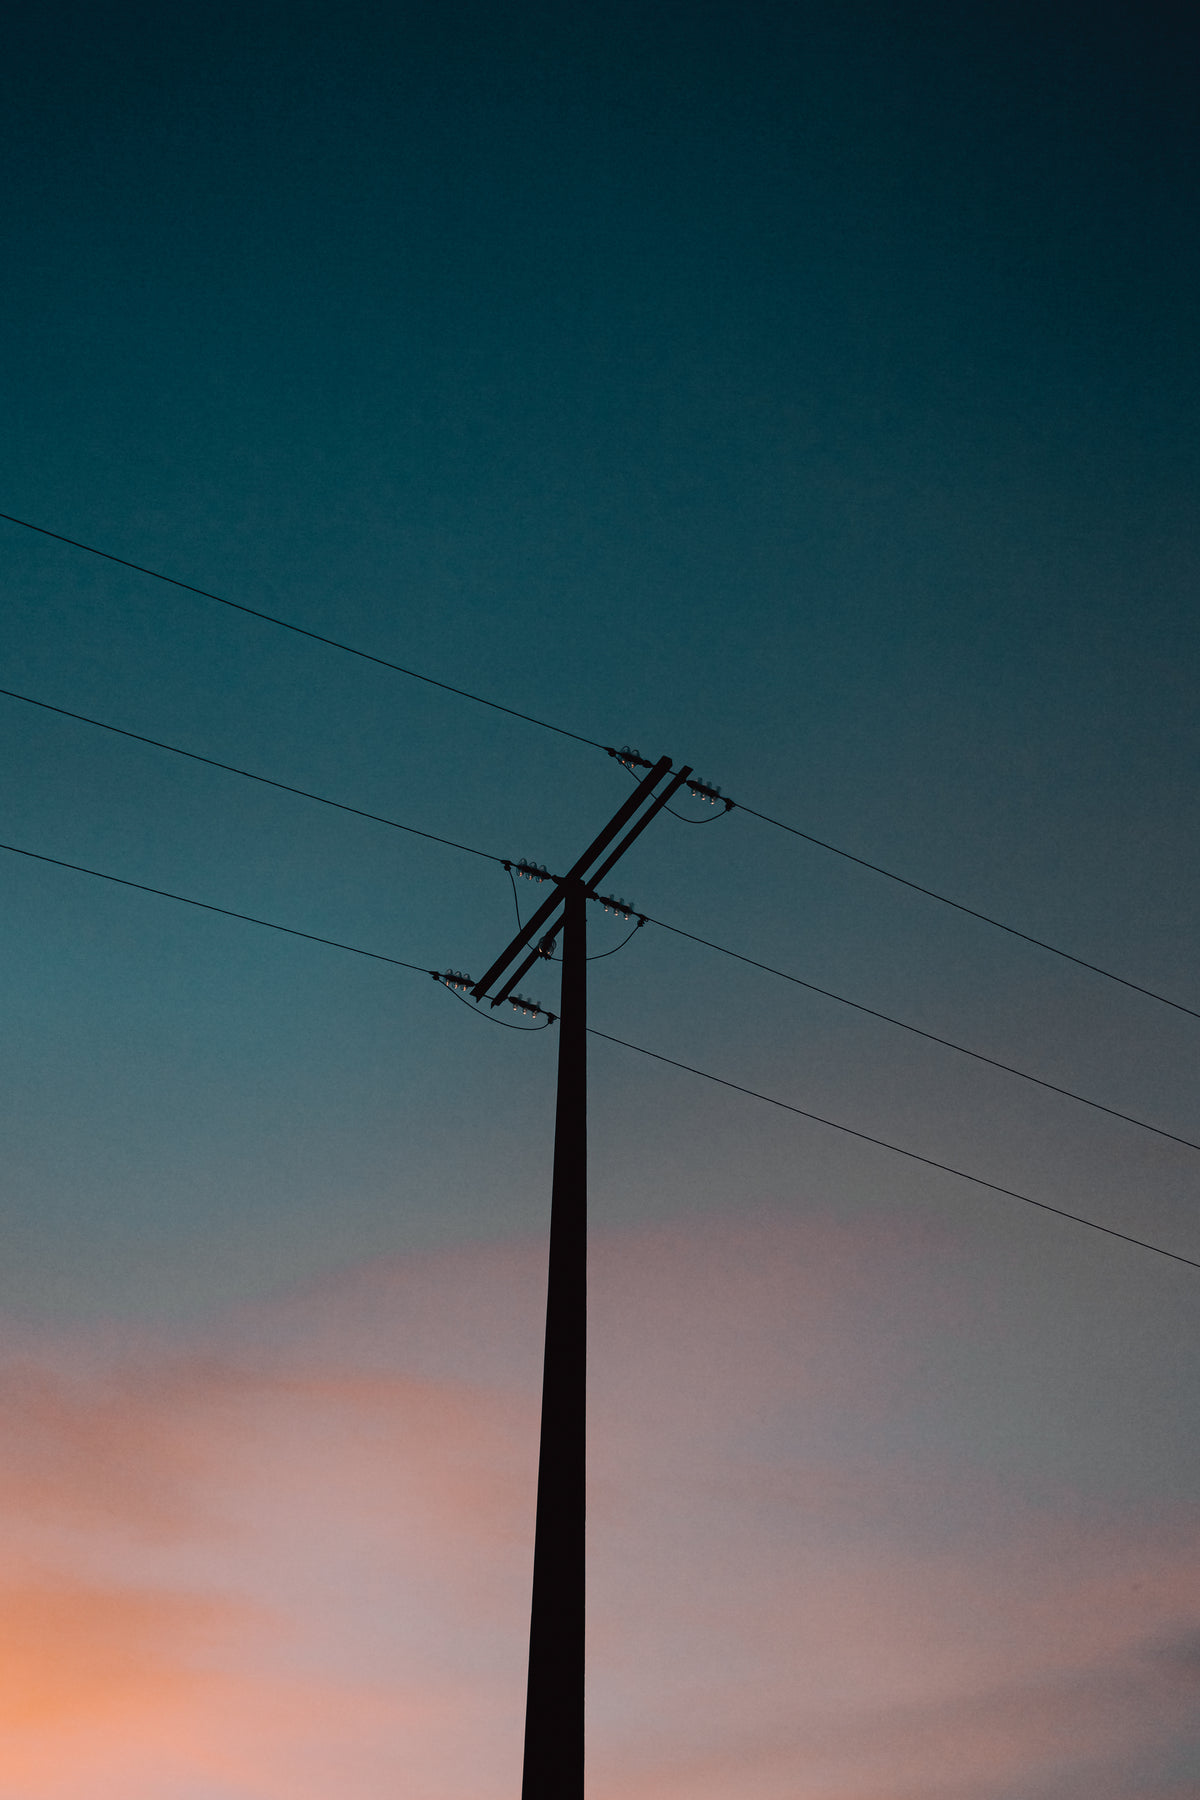 power lines under blue and pink sky